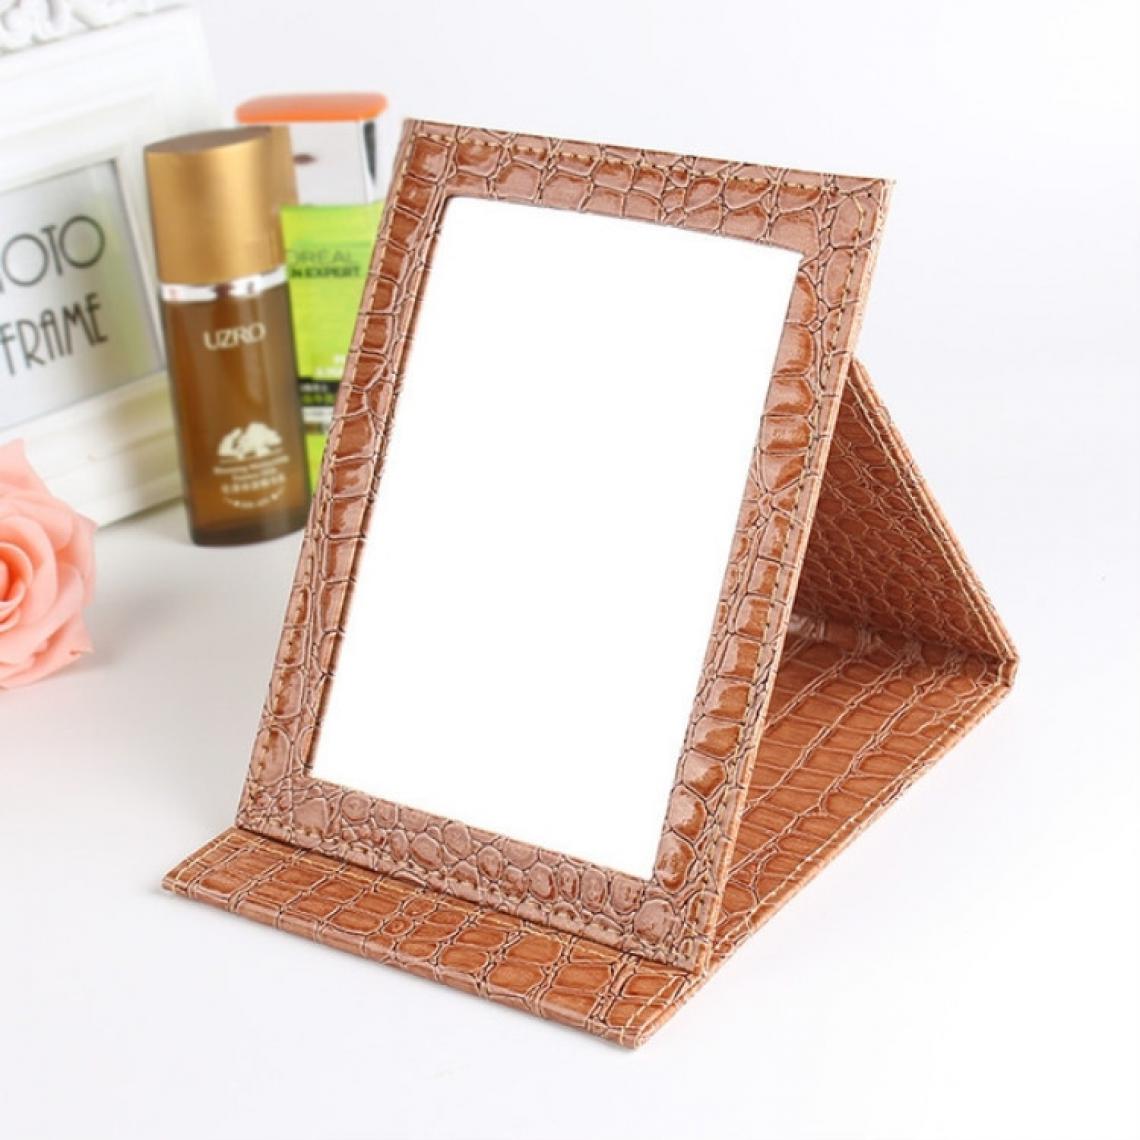 Wewoo - 2 PCS Carré Stand Cuir Maquillage Miroir Alligator Motif Portable Cosmetic MirrorMarronTaille M15x20.5x1.6CM - Miroirs